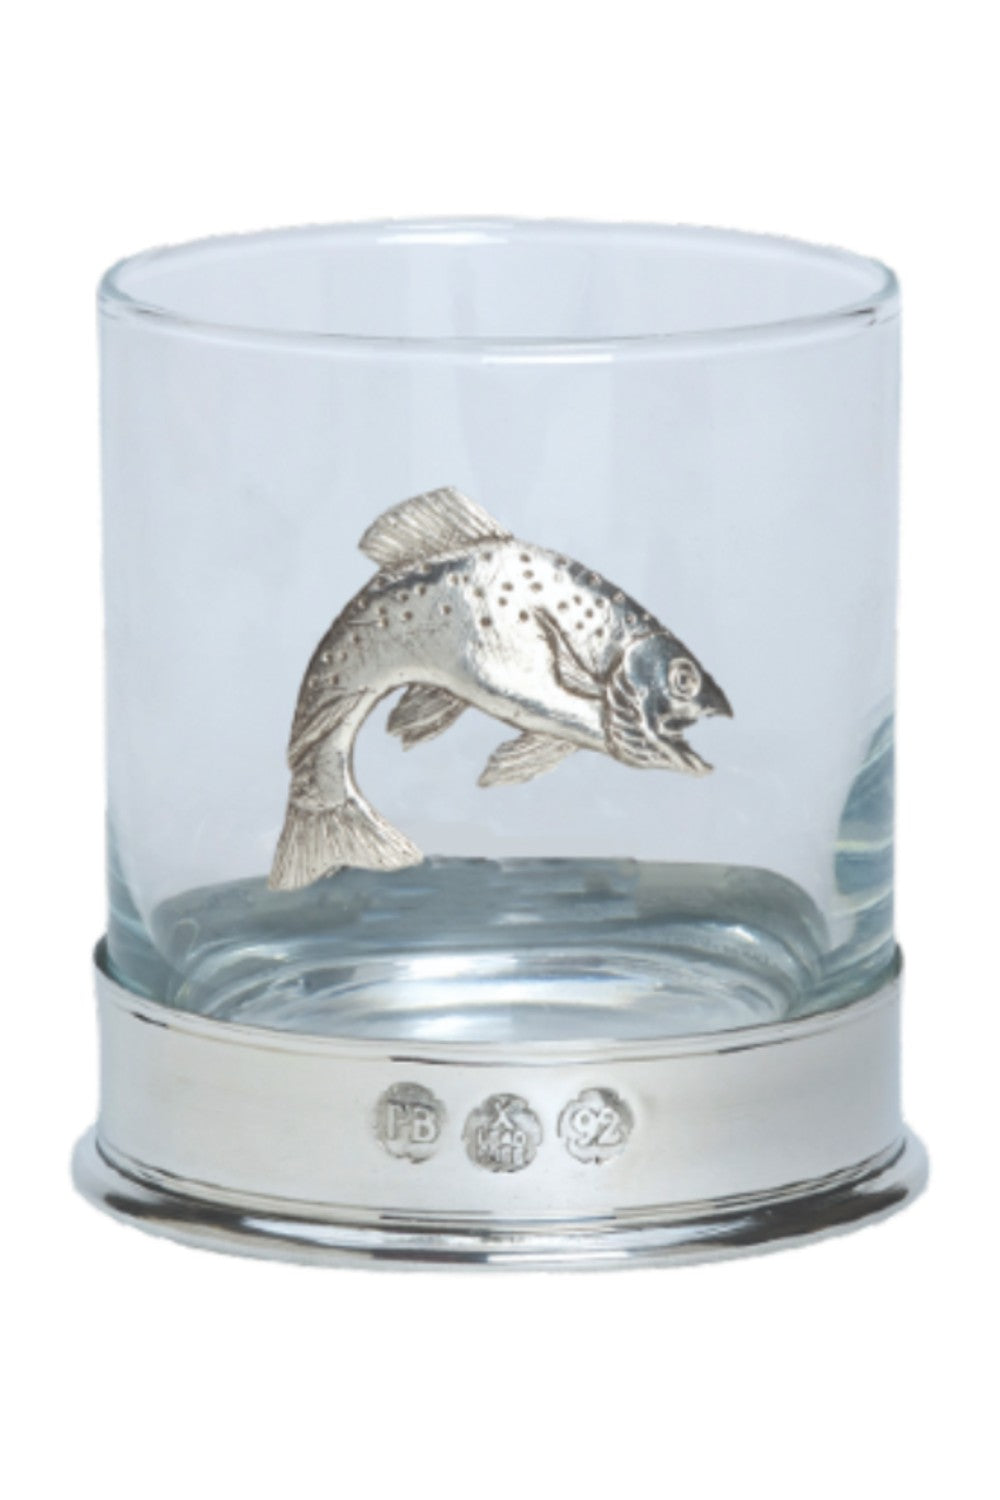 Bisley Whisky Glasses In Trout